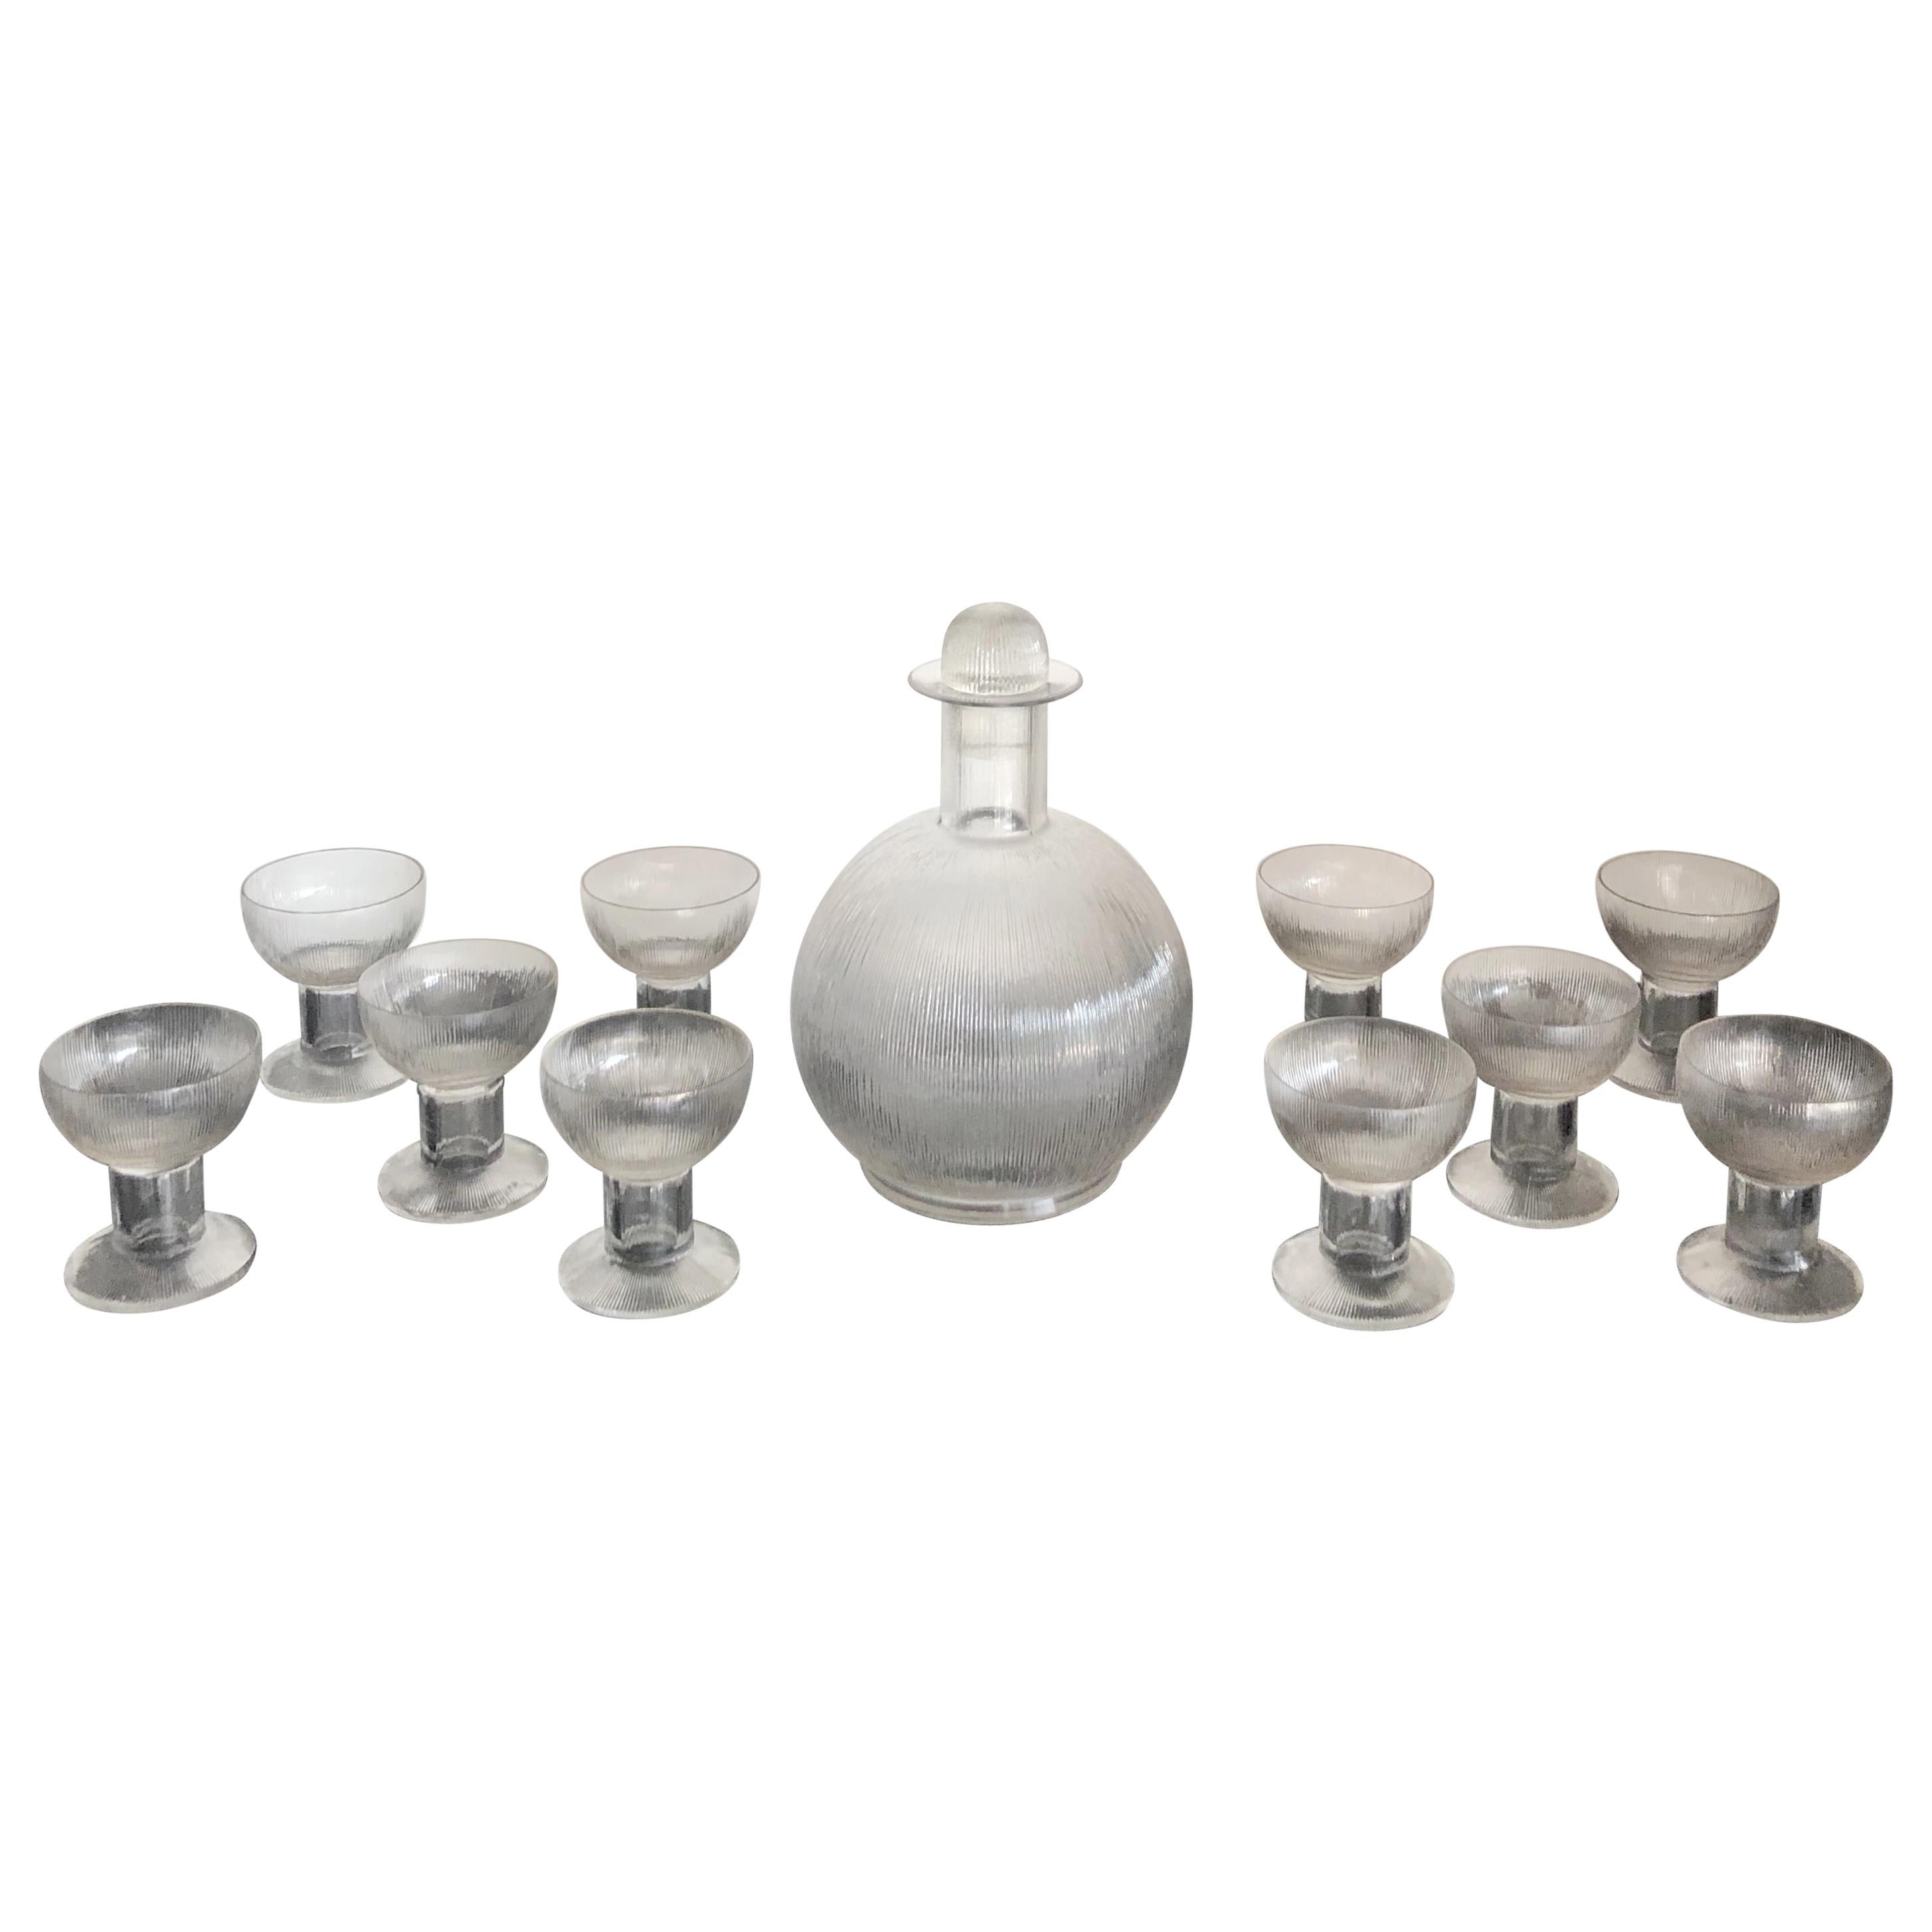 1926 Rene Lalique Wingen Set 11 Pieces Drinking Glasses Stems and Decanter